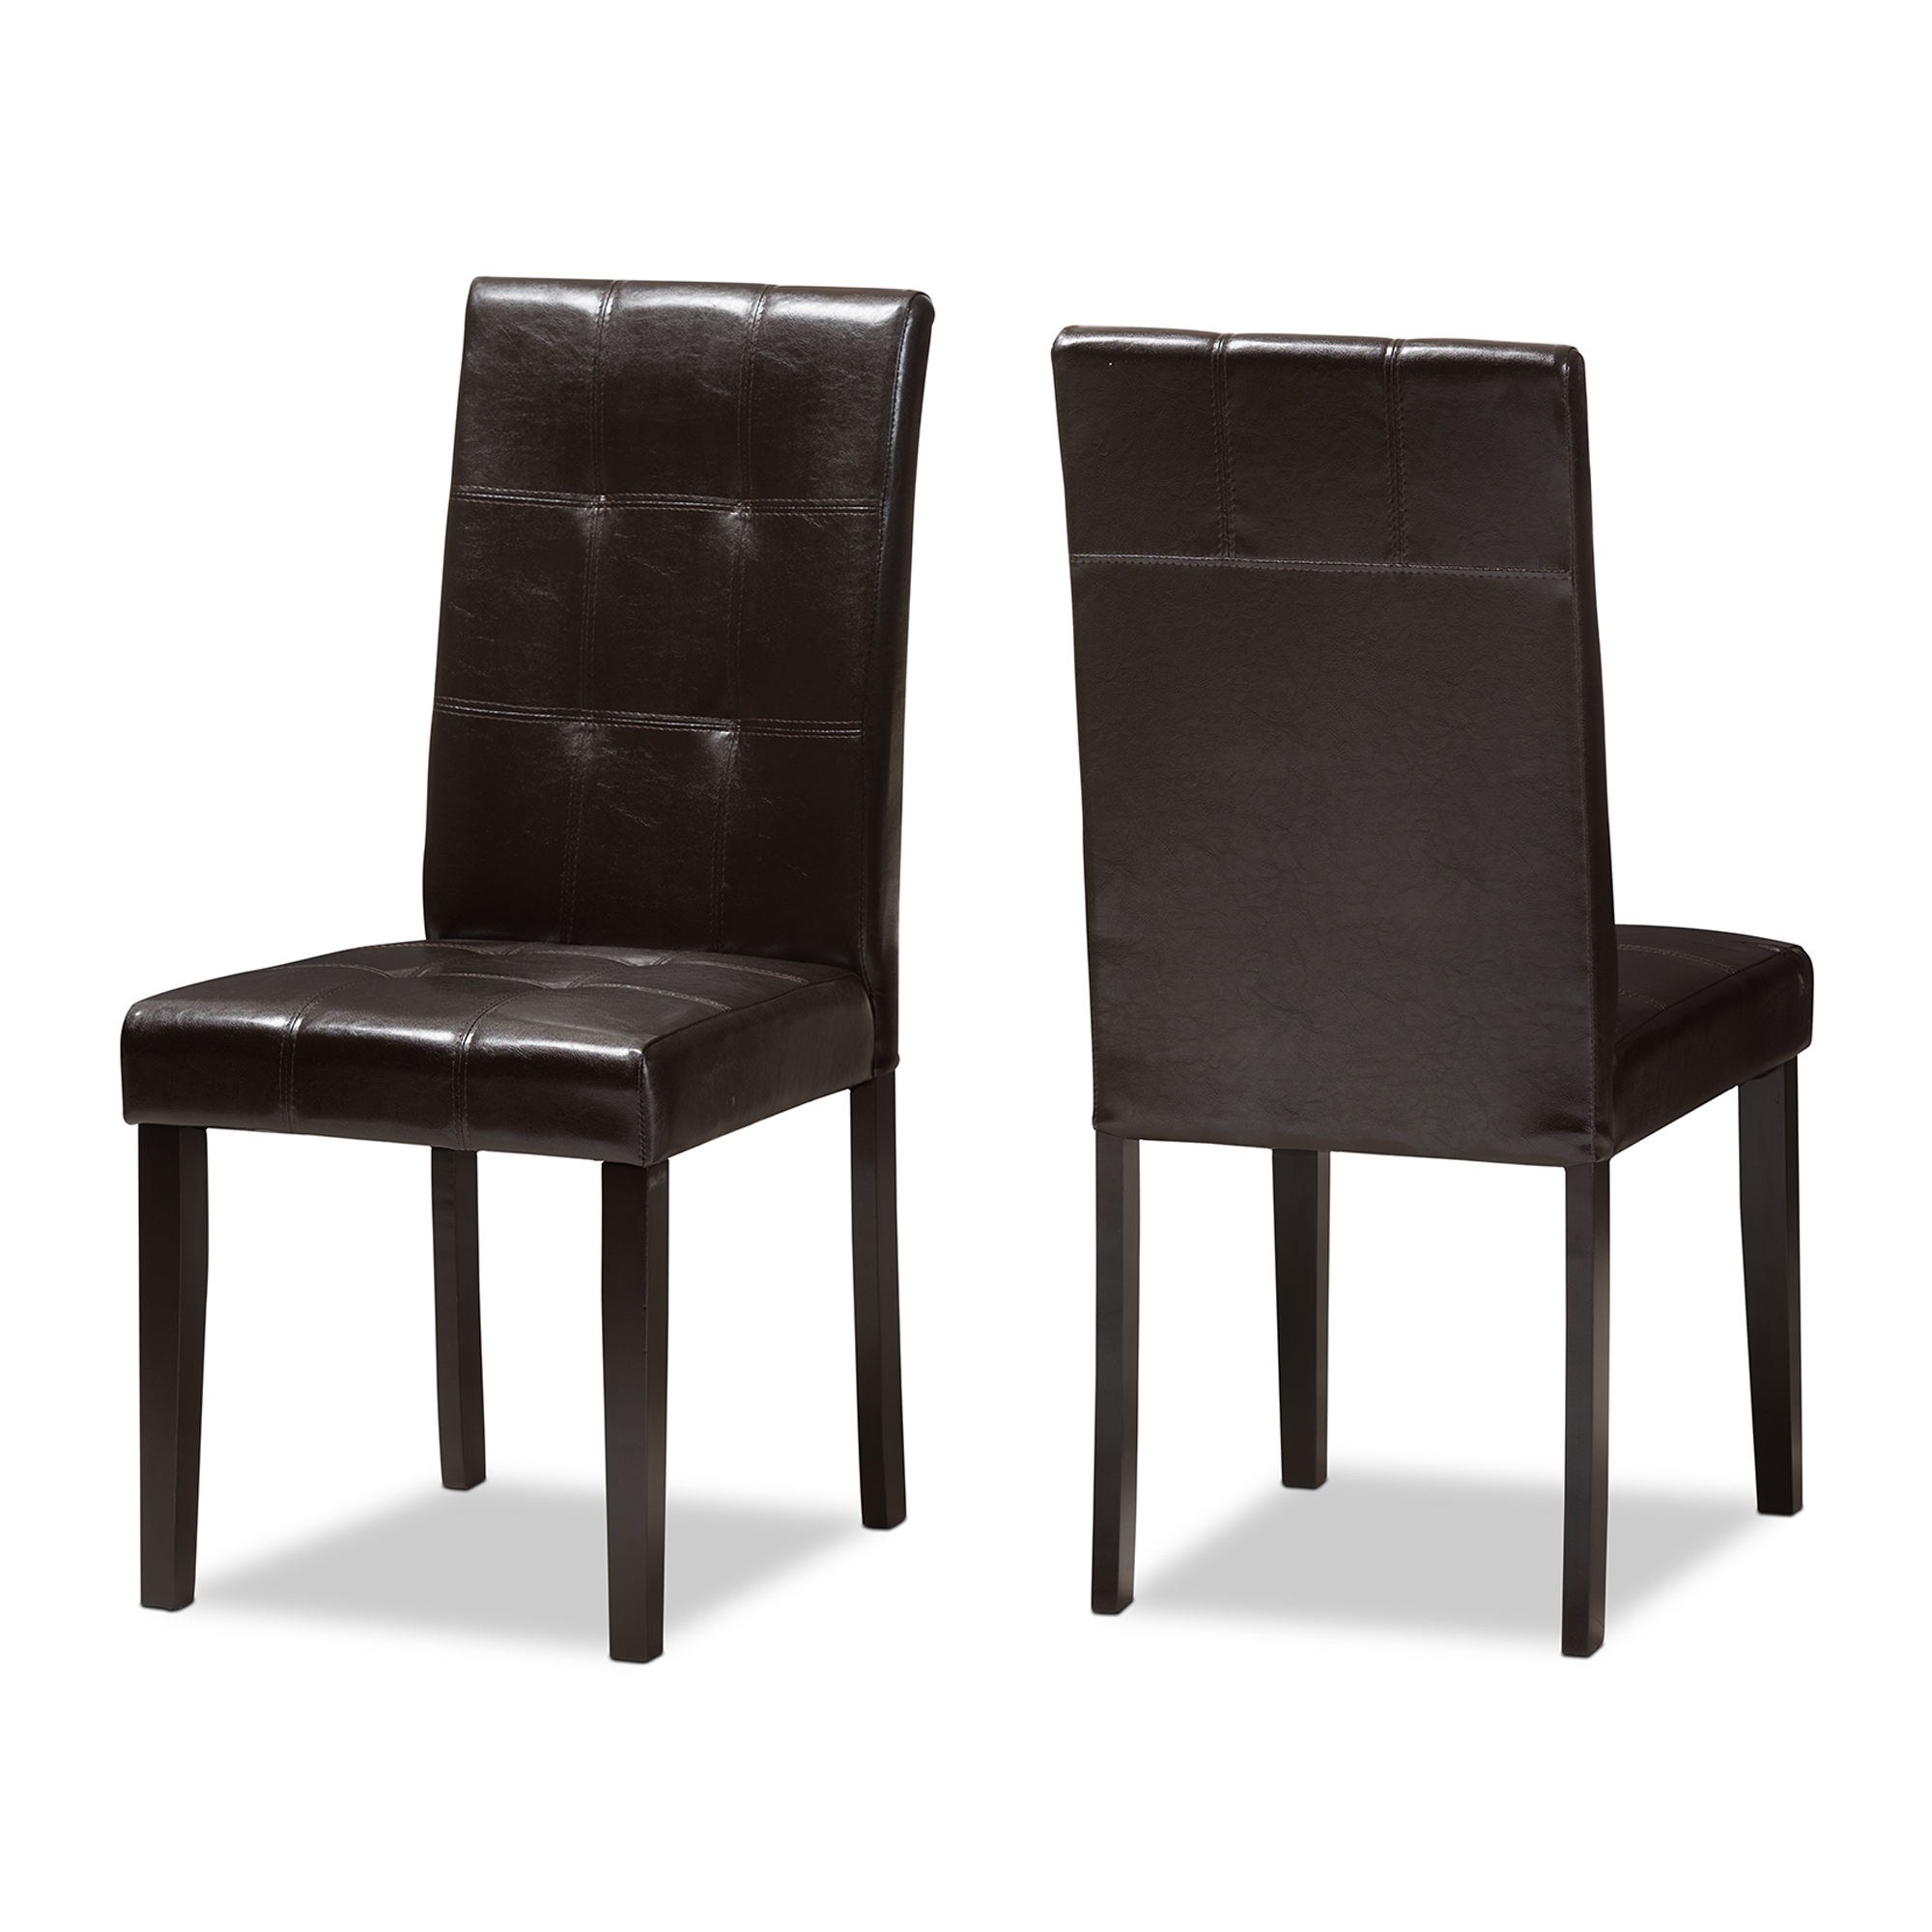 Baxton Studio Avery Modern and Contemporary Dark Brown Faux Leather Upholstered Dining Chair Set of 2